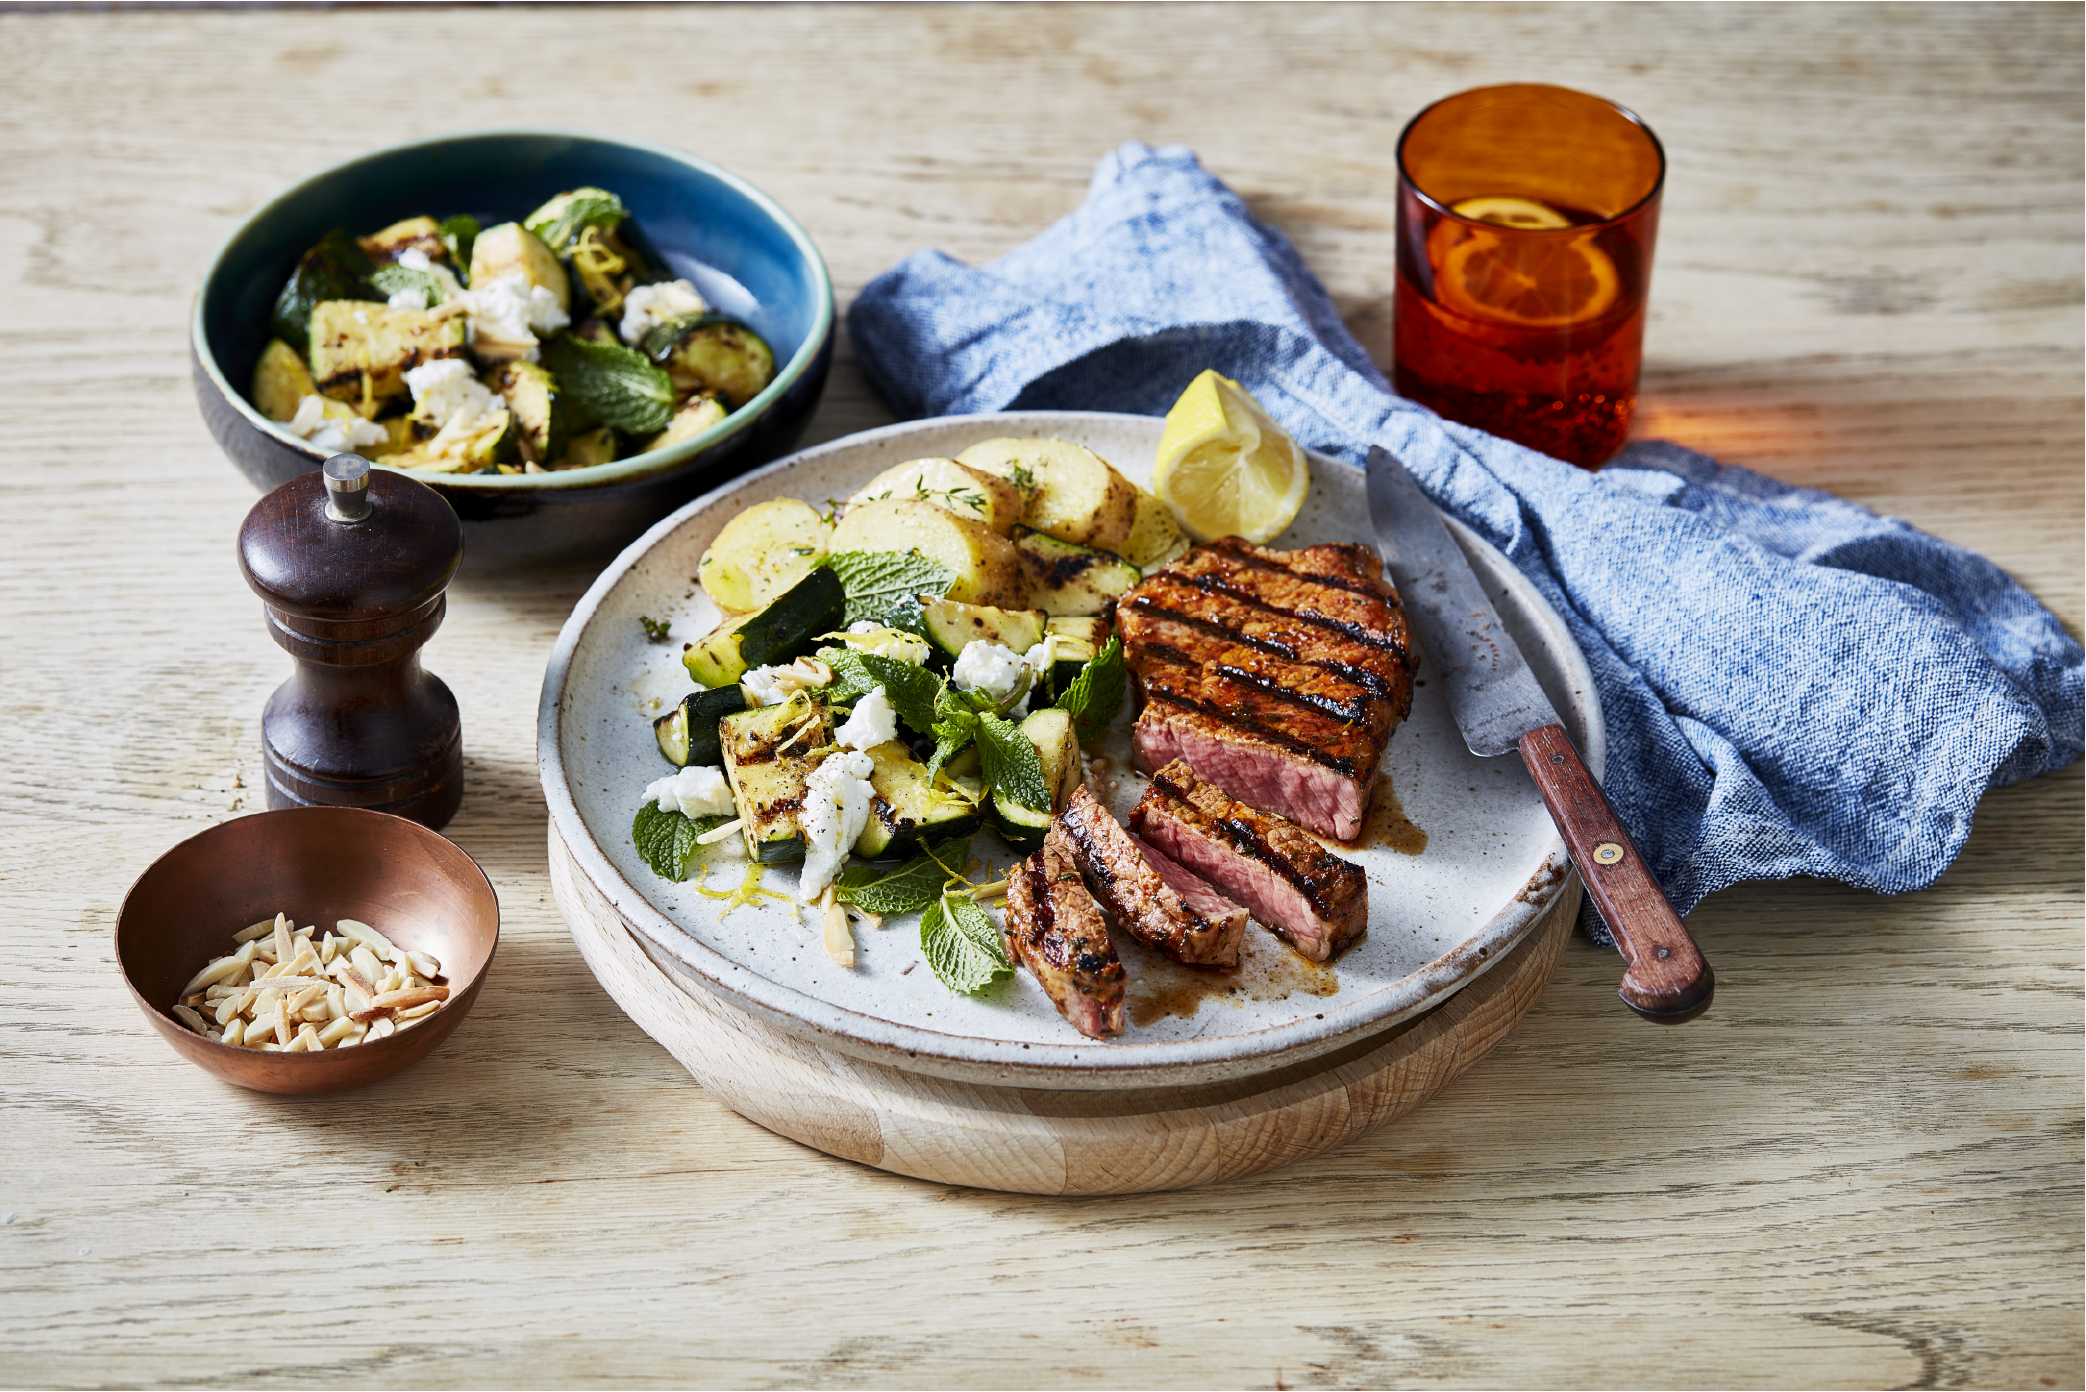 HARISSA PORTERHOUSE WITH CHARGRILLED ZUCCHINI